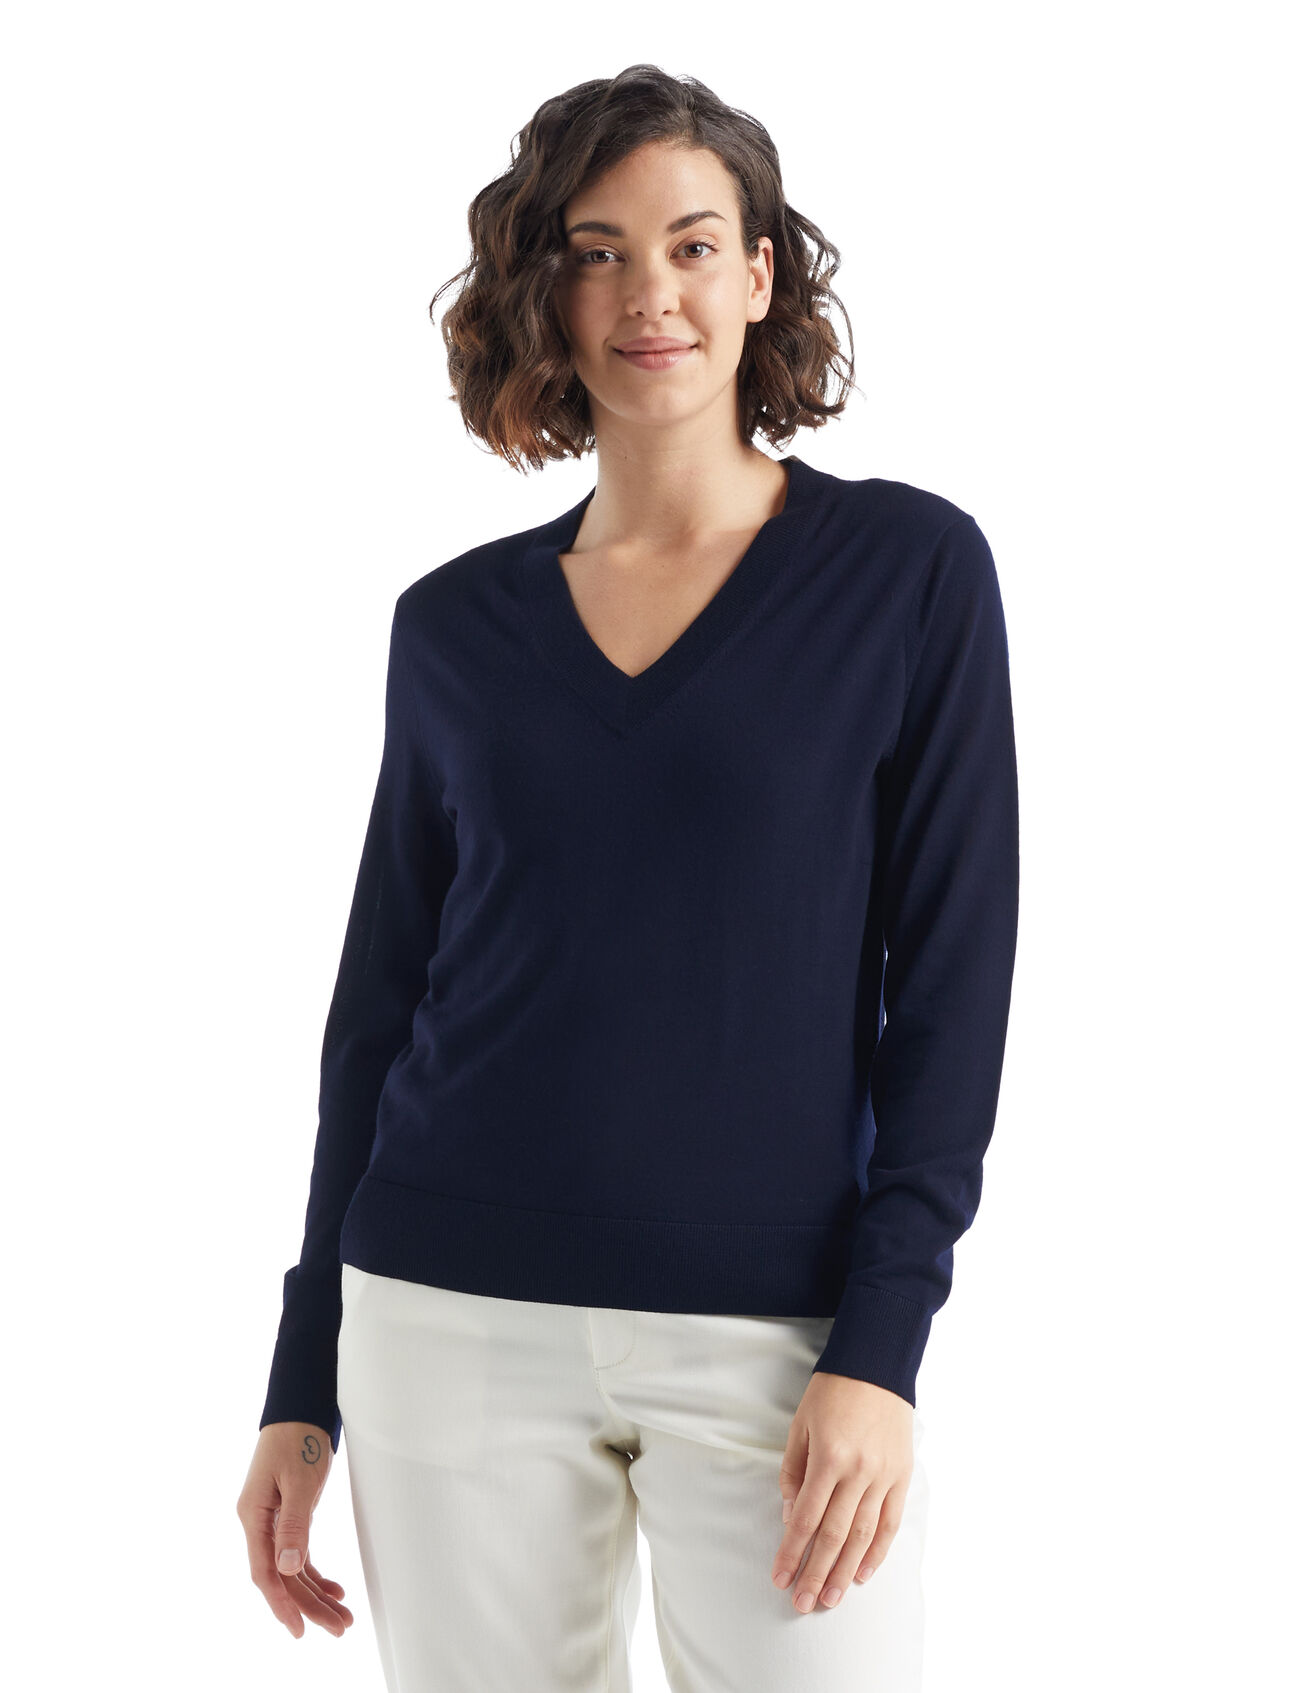 Womens Merino Wilcox Merino Long Sleeve Sweater  A classic everyday sweater made with ultra-fine gauge merino wool for unparalleled softness, the Wilcox Long Sleeve V Sweater is perfect for days when you need a light extra layer.